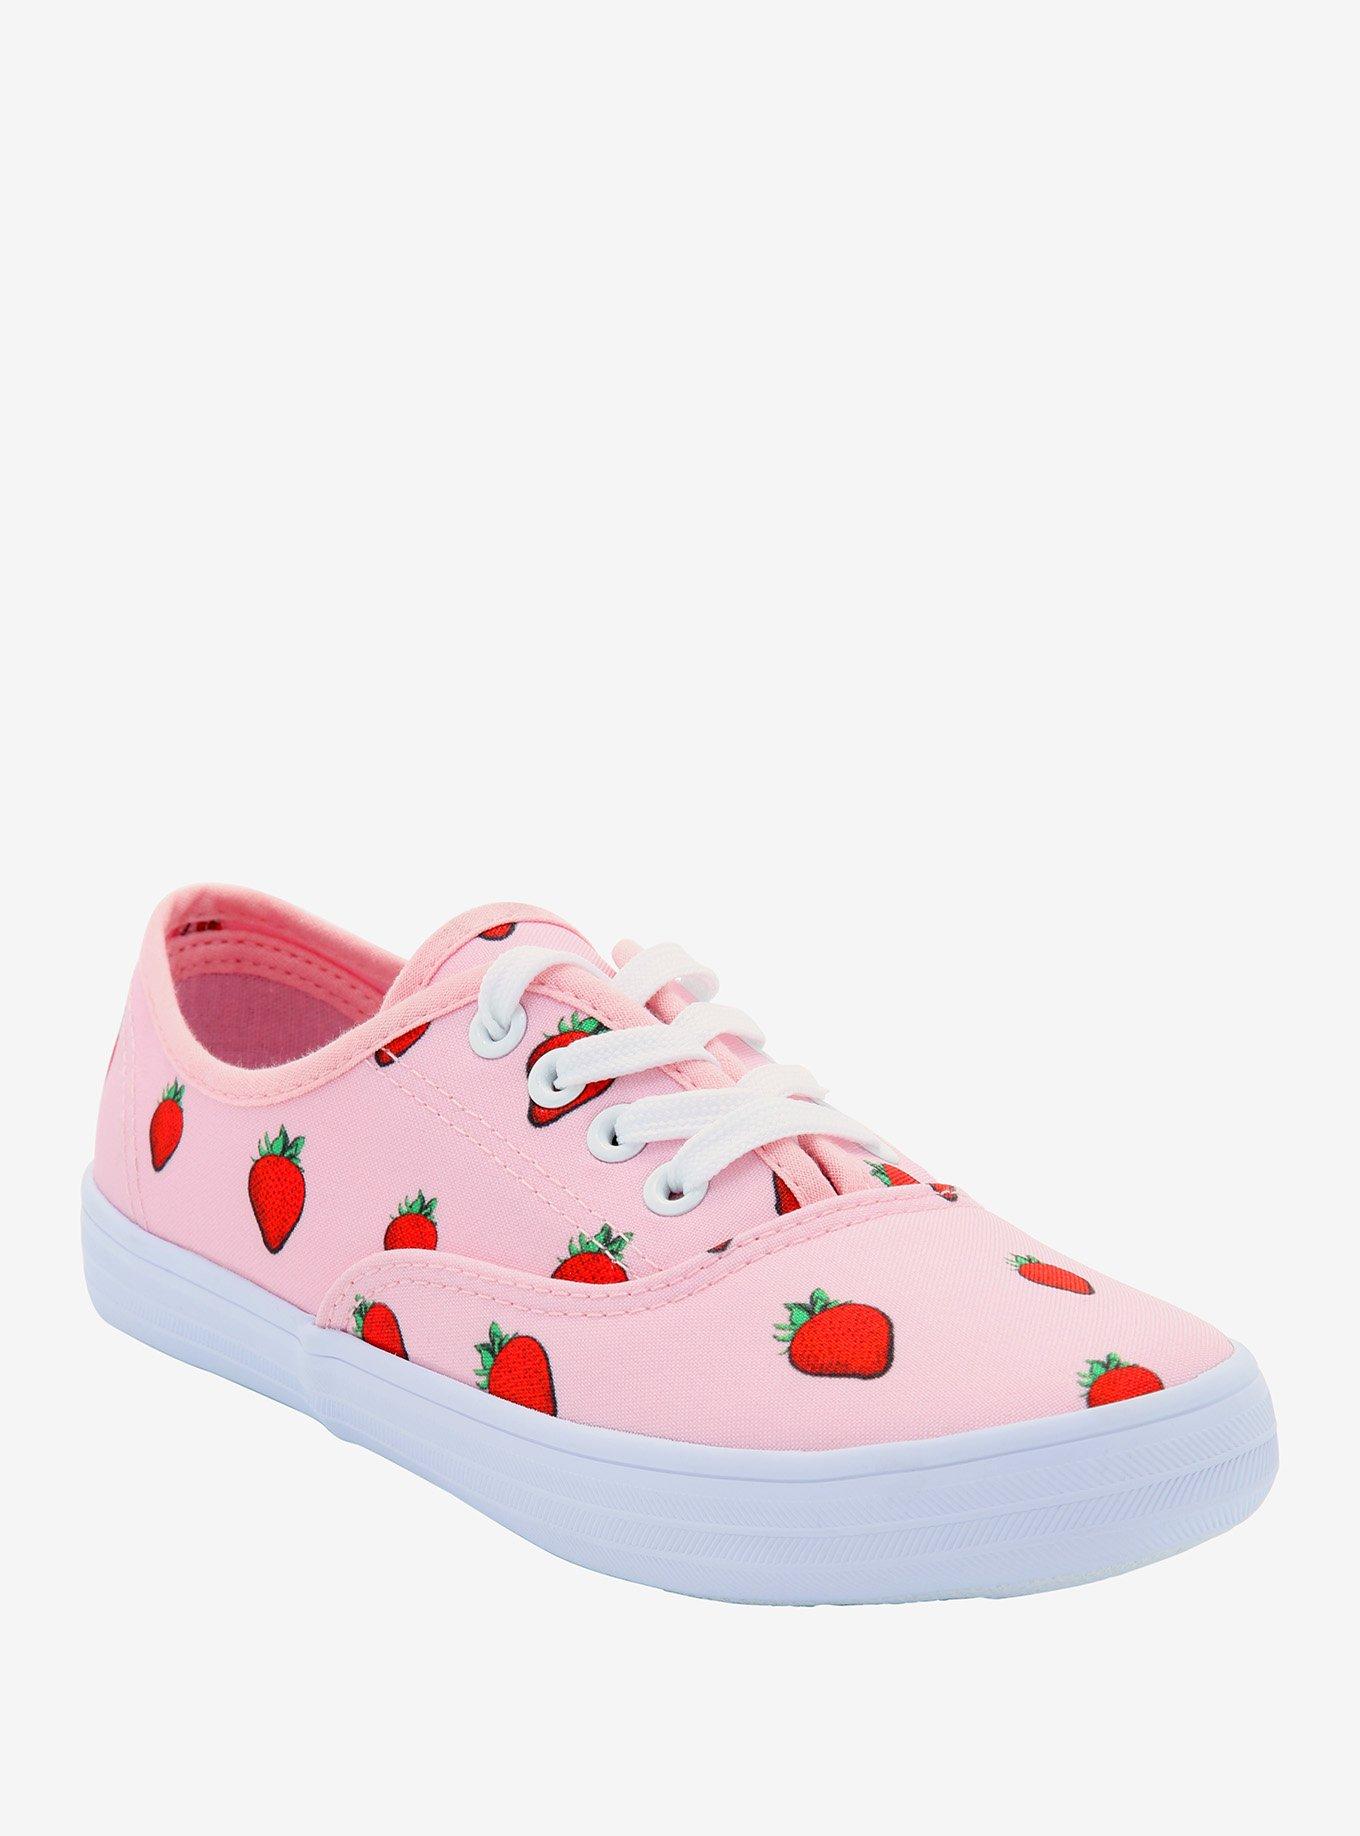 Lady's Disco Shield lace up sneaker - REPLAY Online Store